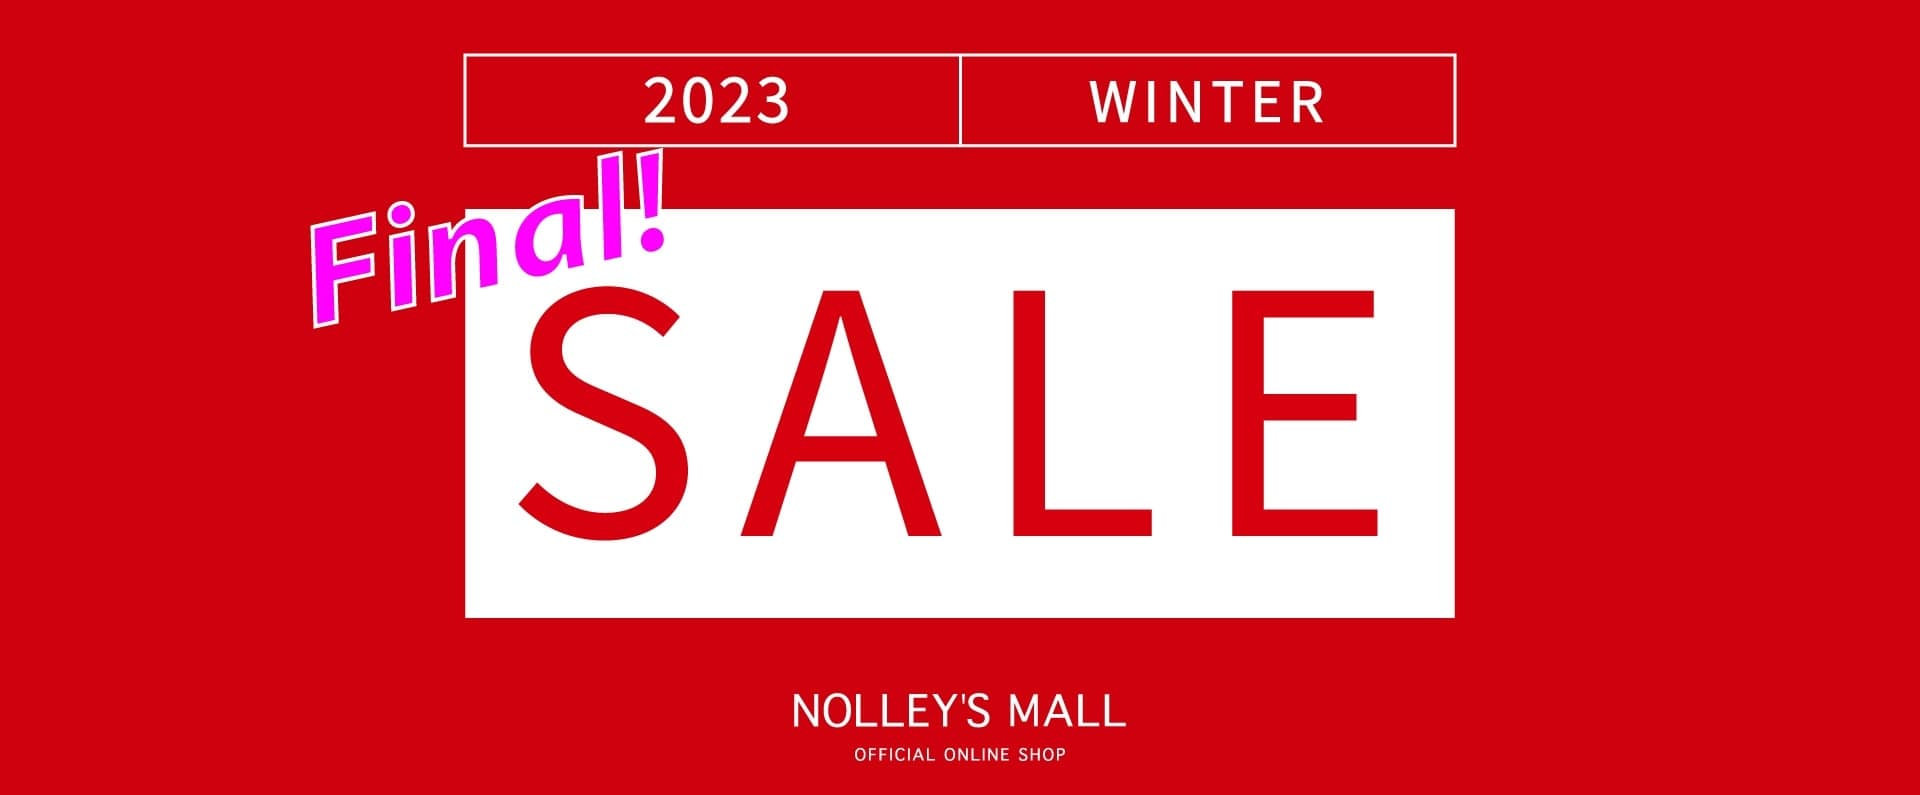 【NOLLEY'S MALL】FINAL SALE!